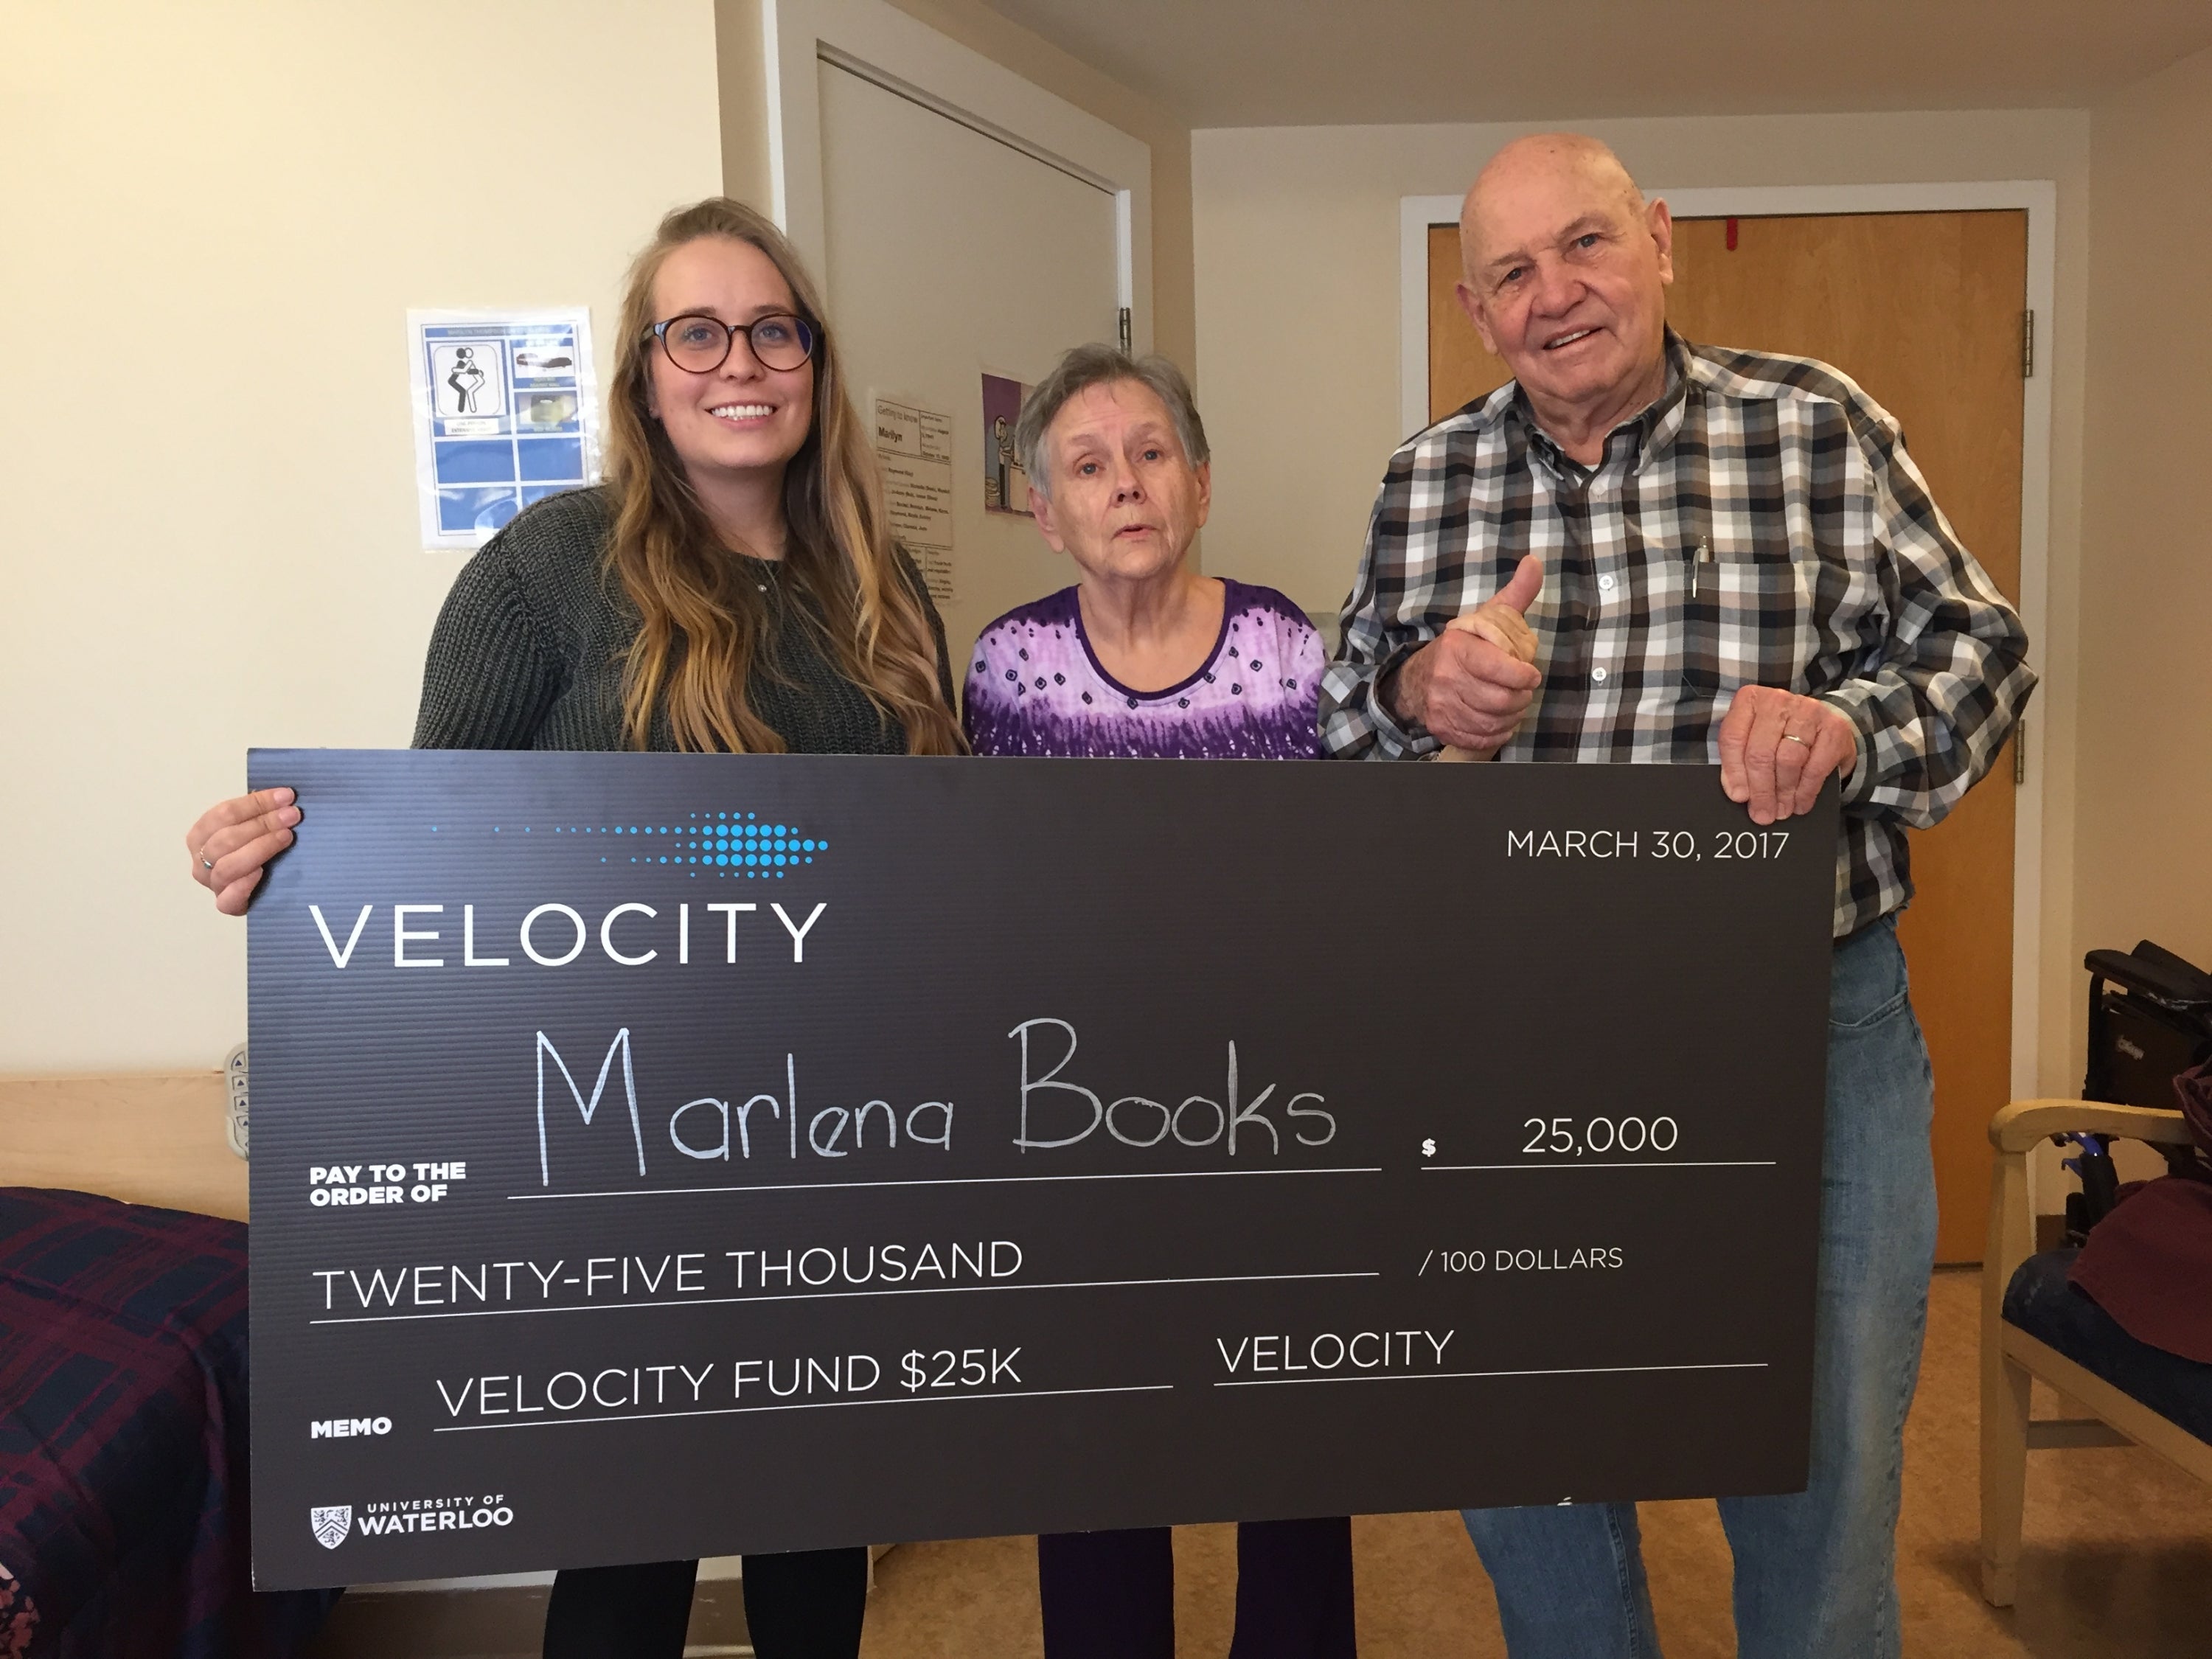 Rachael and her grandparents with the Velocity Fund Award